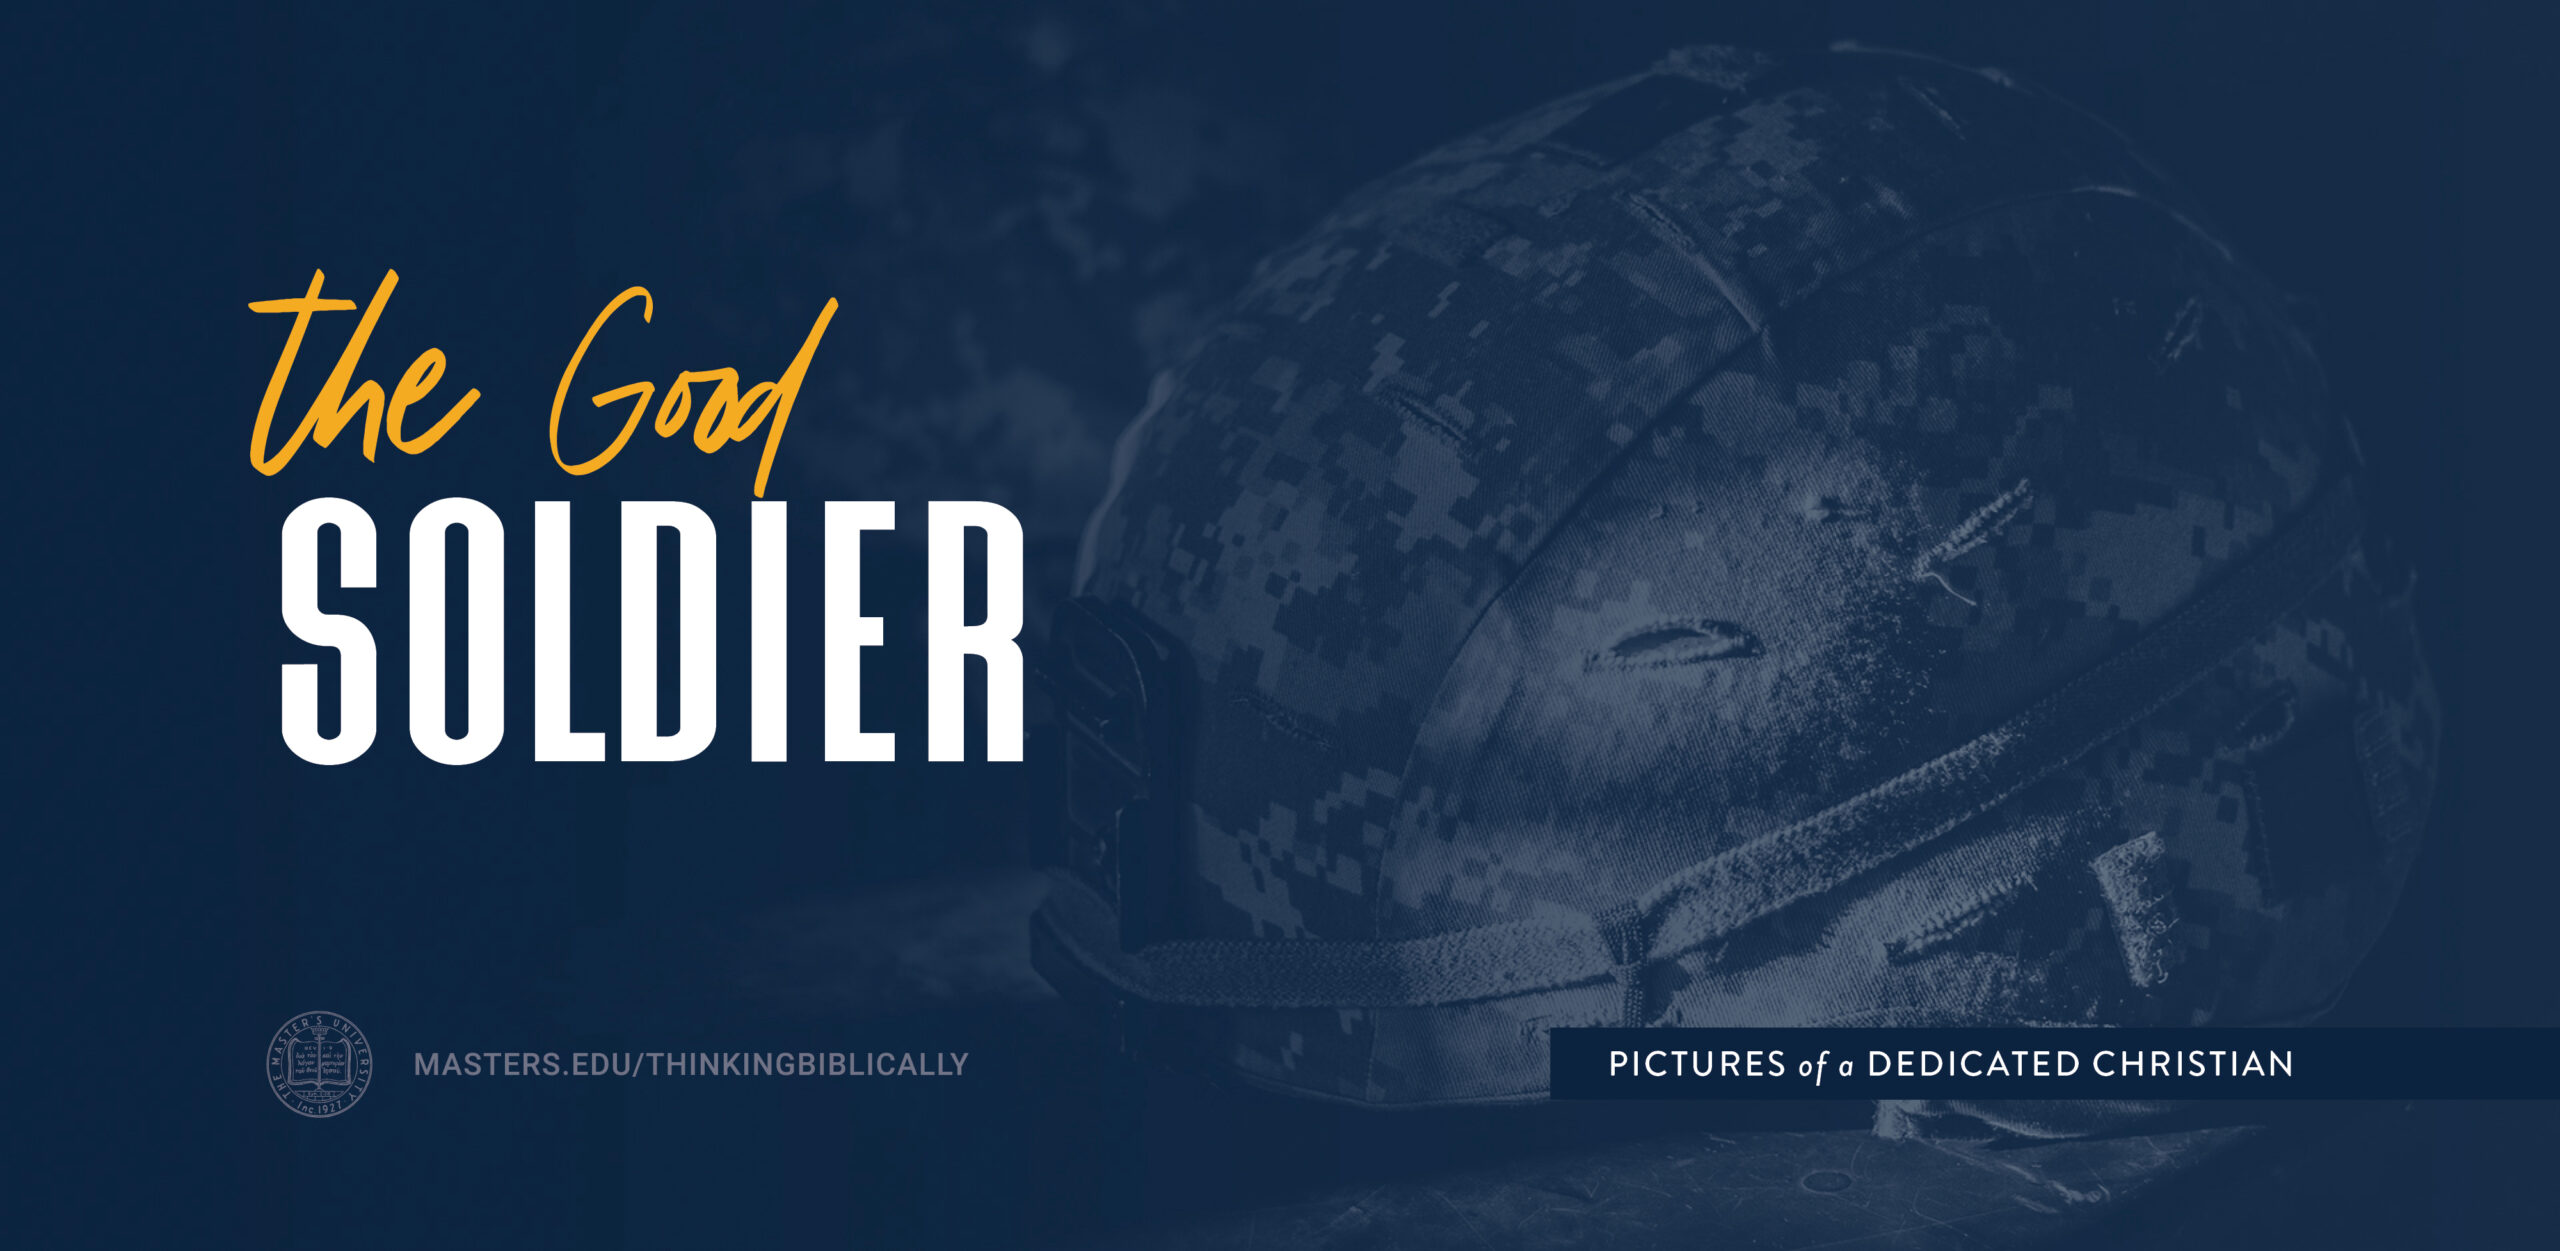 The Good Soldier Featured Image